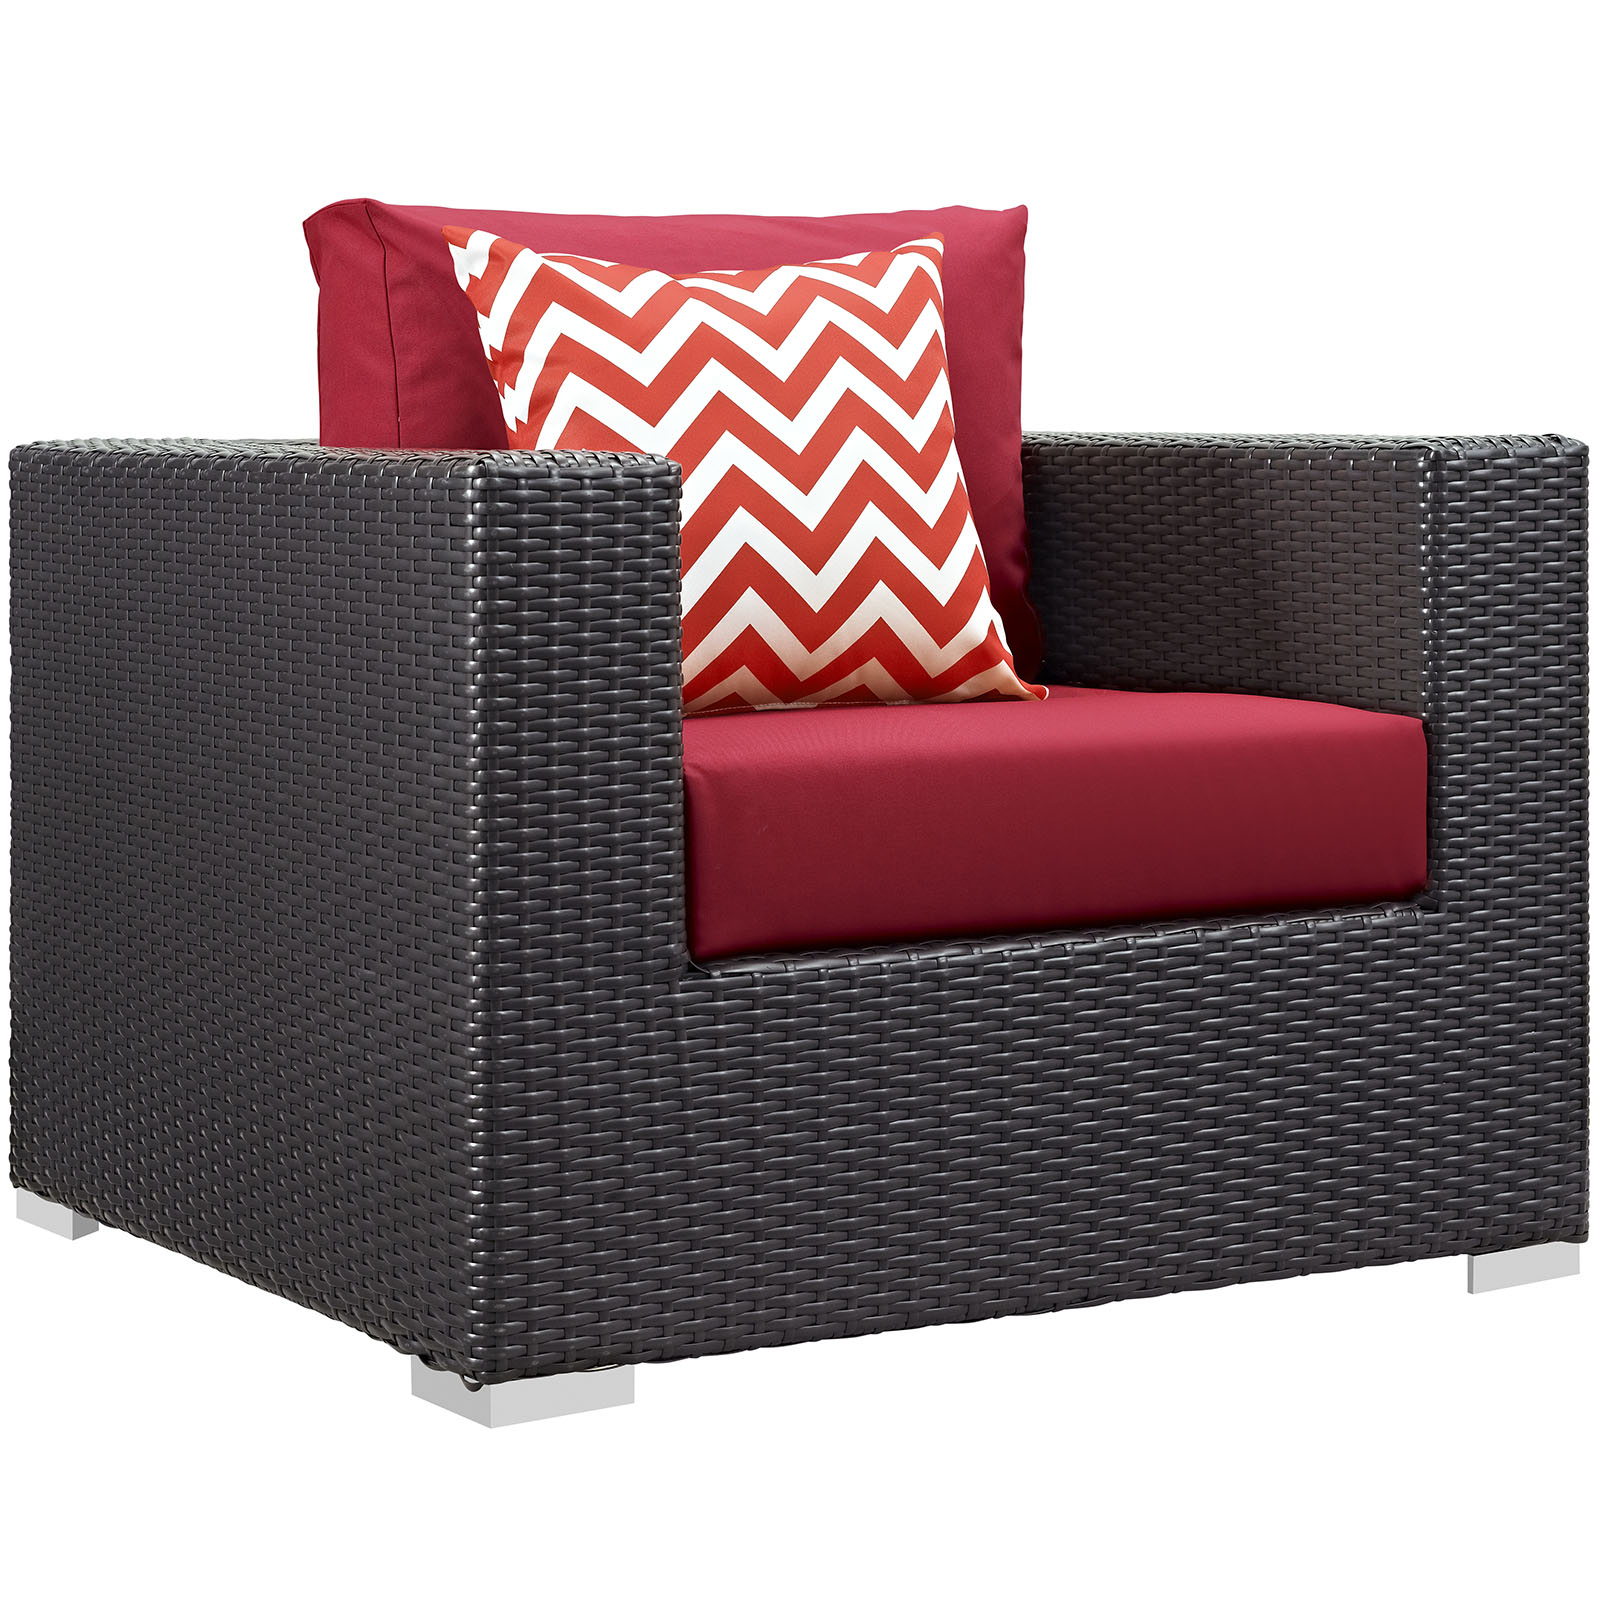 Modway Convene 6 Piece Outdoor Patio Sectional Set in Espresso Red - image 2 of 5